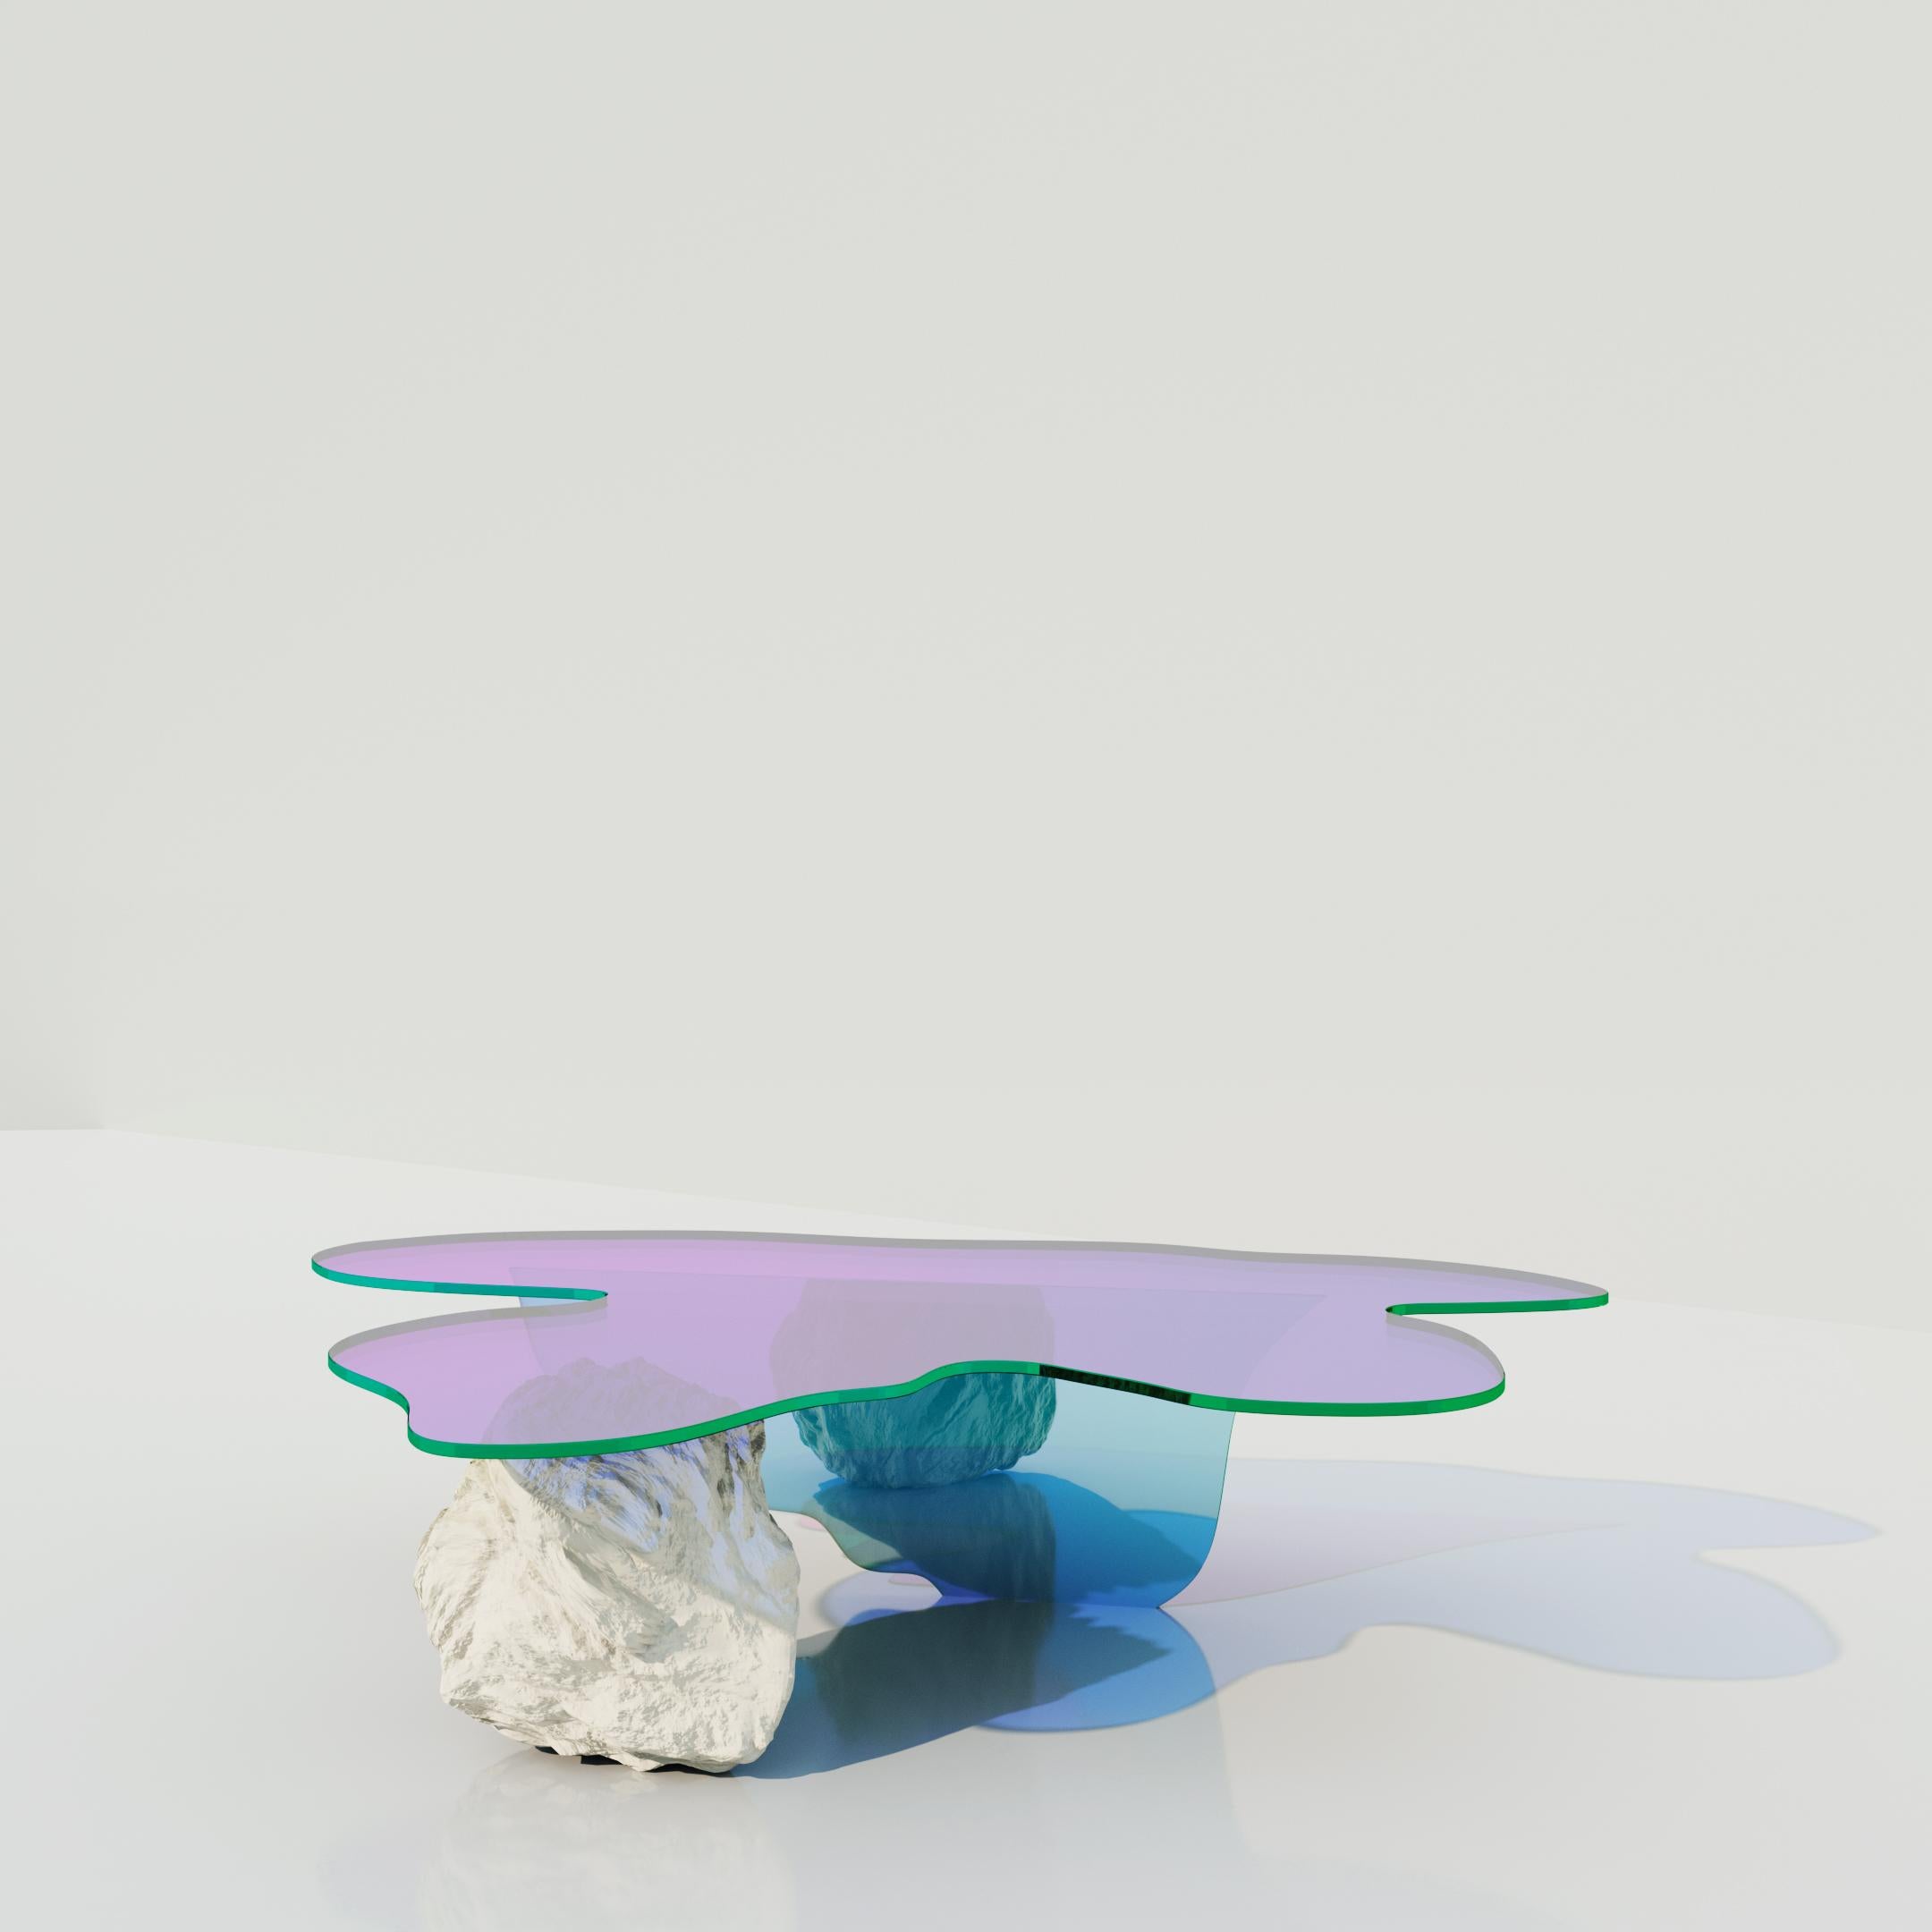 Isola coffee table by Brajak Vitberg
Dimensions: 30 x 100 x 120 cm
Materials: Dichroic glass, natural stone

The table is made out of glass with satin finish and dichroic insert.
The colors in this kind of satin finish are more subtle but still